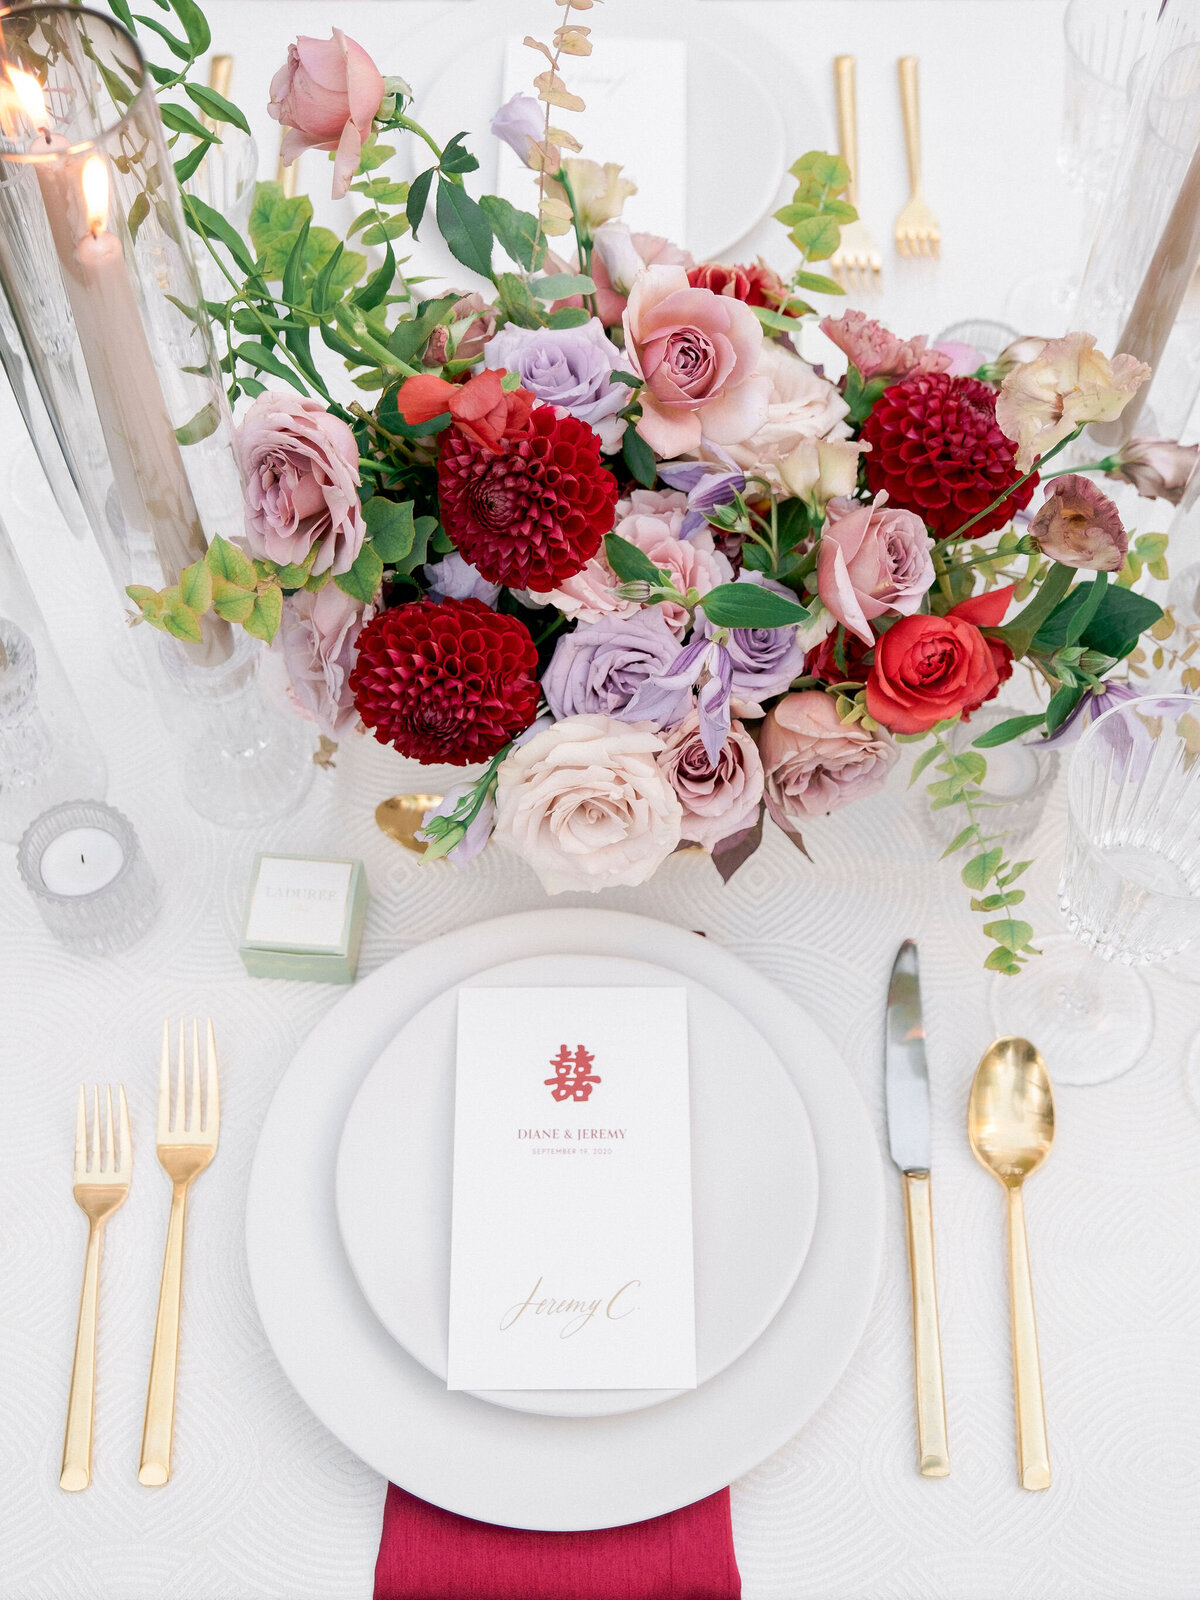 Red wedding place setting